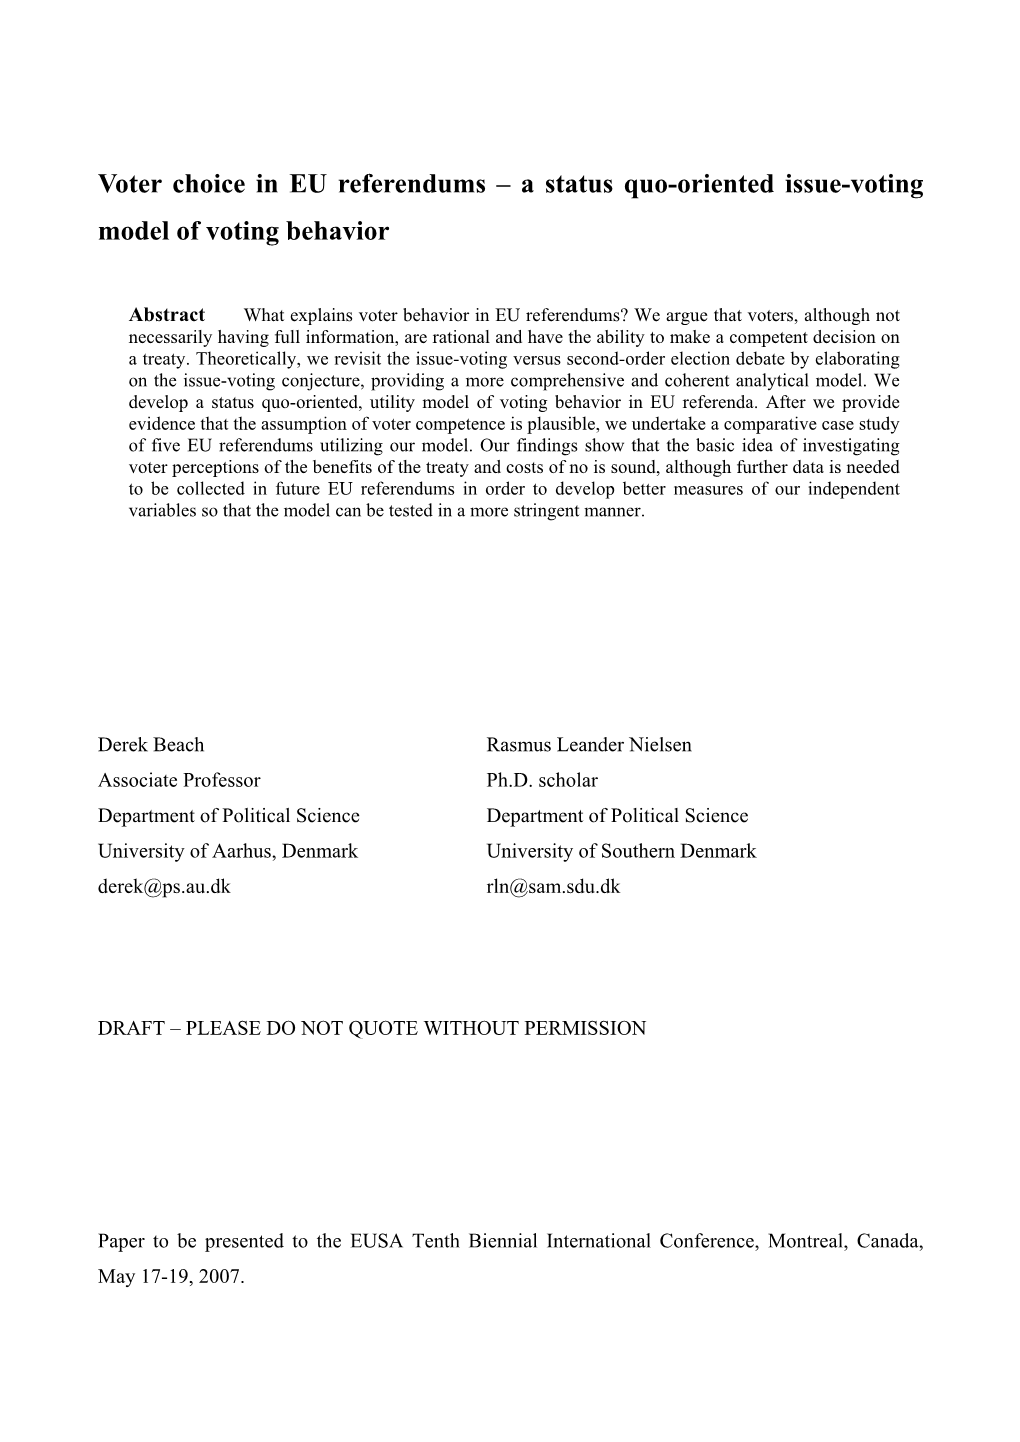 Voter Choice in EU Referendums – a Status-Quo Oriented Issue-Voting Model of Voting Behavior